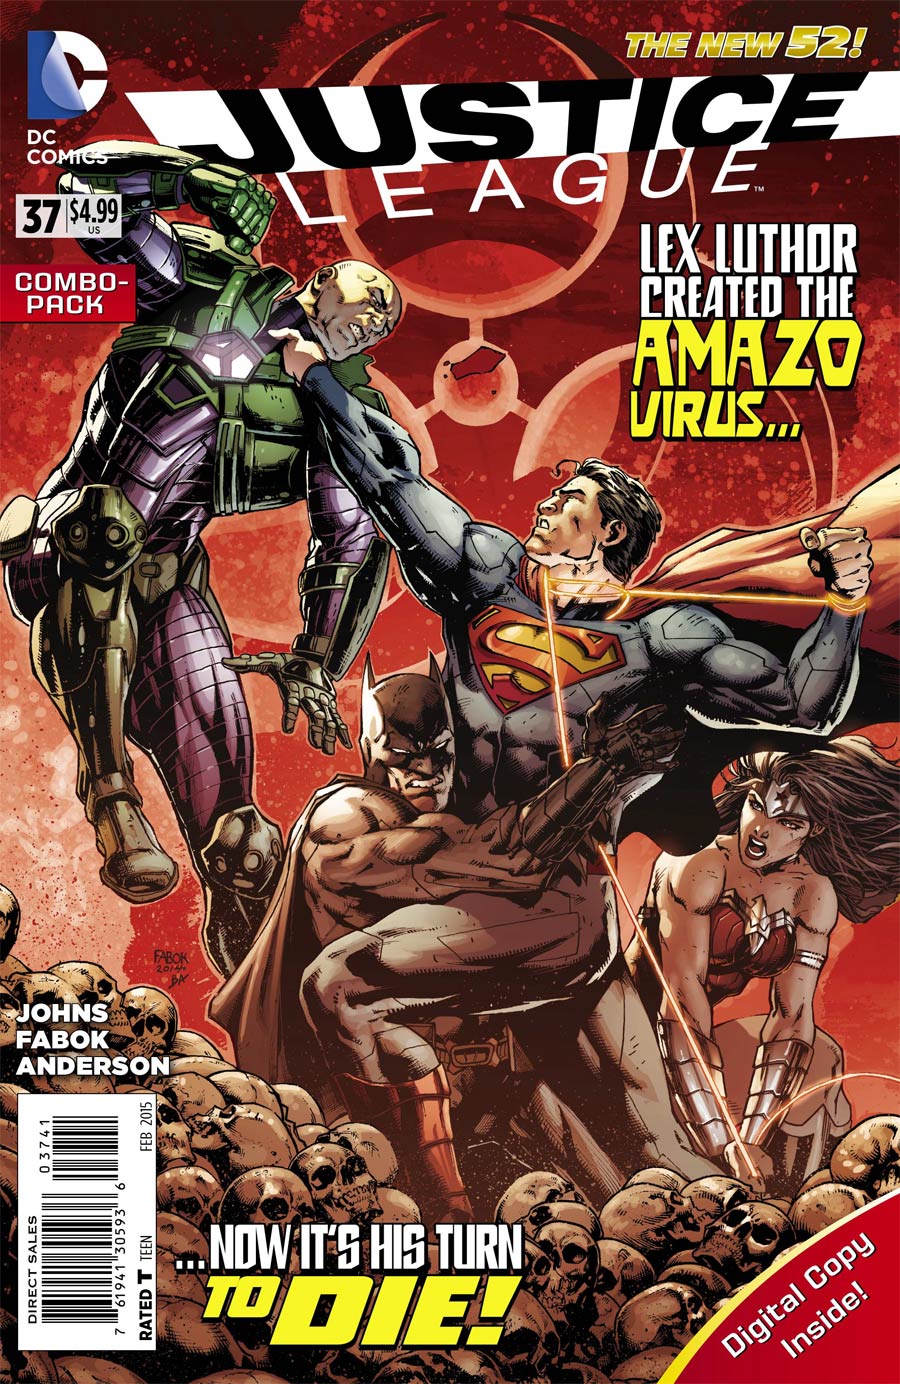 Justice League Vol 2 #37 Cover D Combo Pack Without Polybag